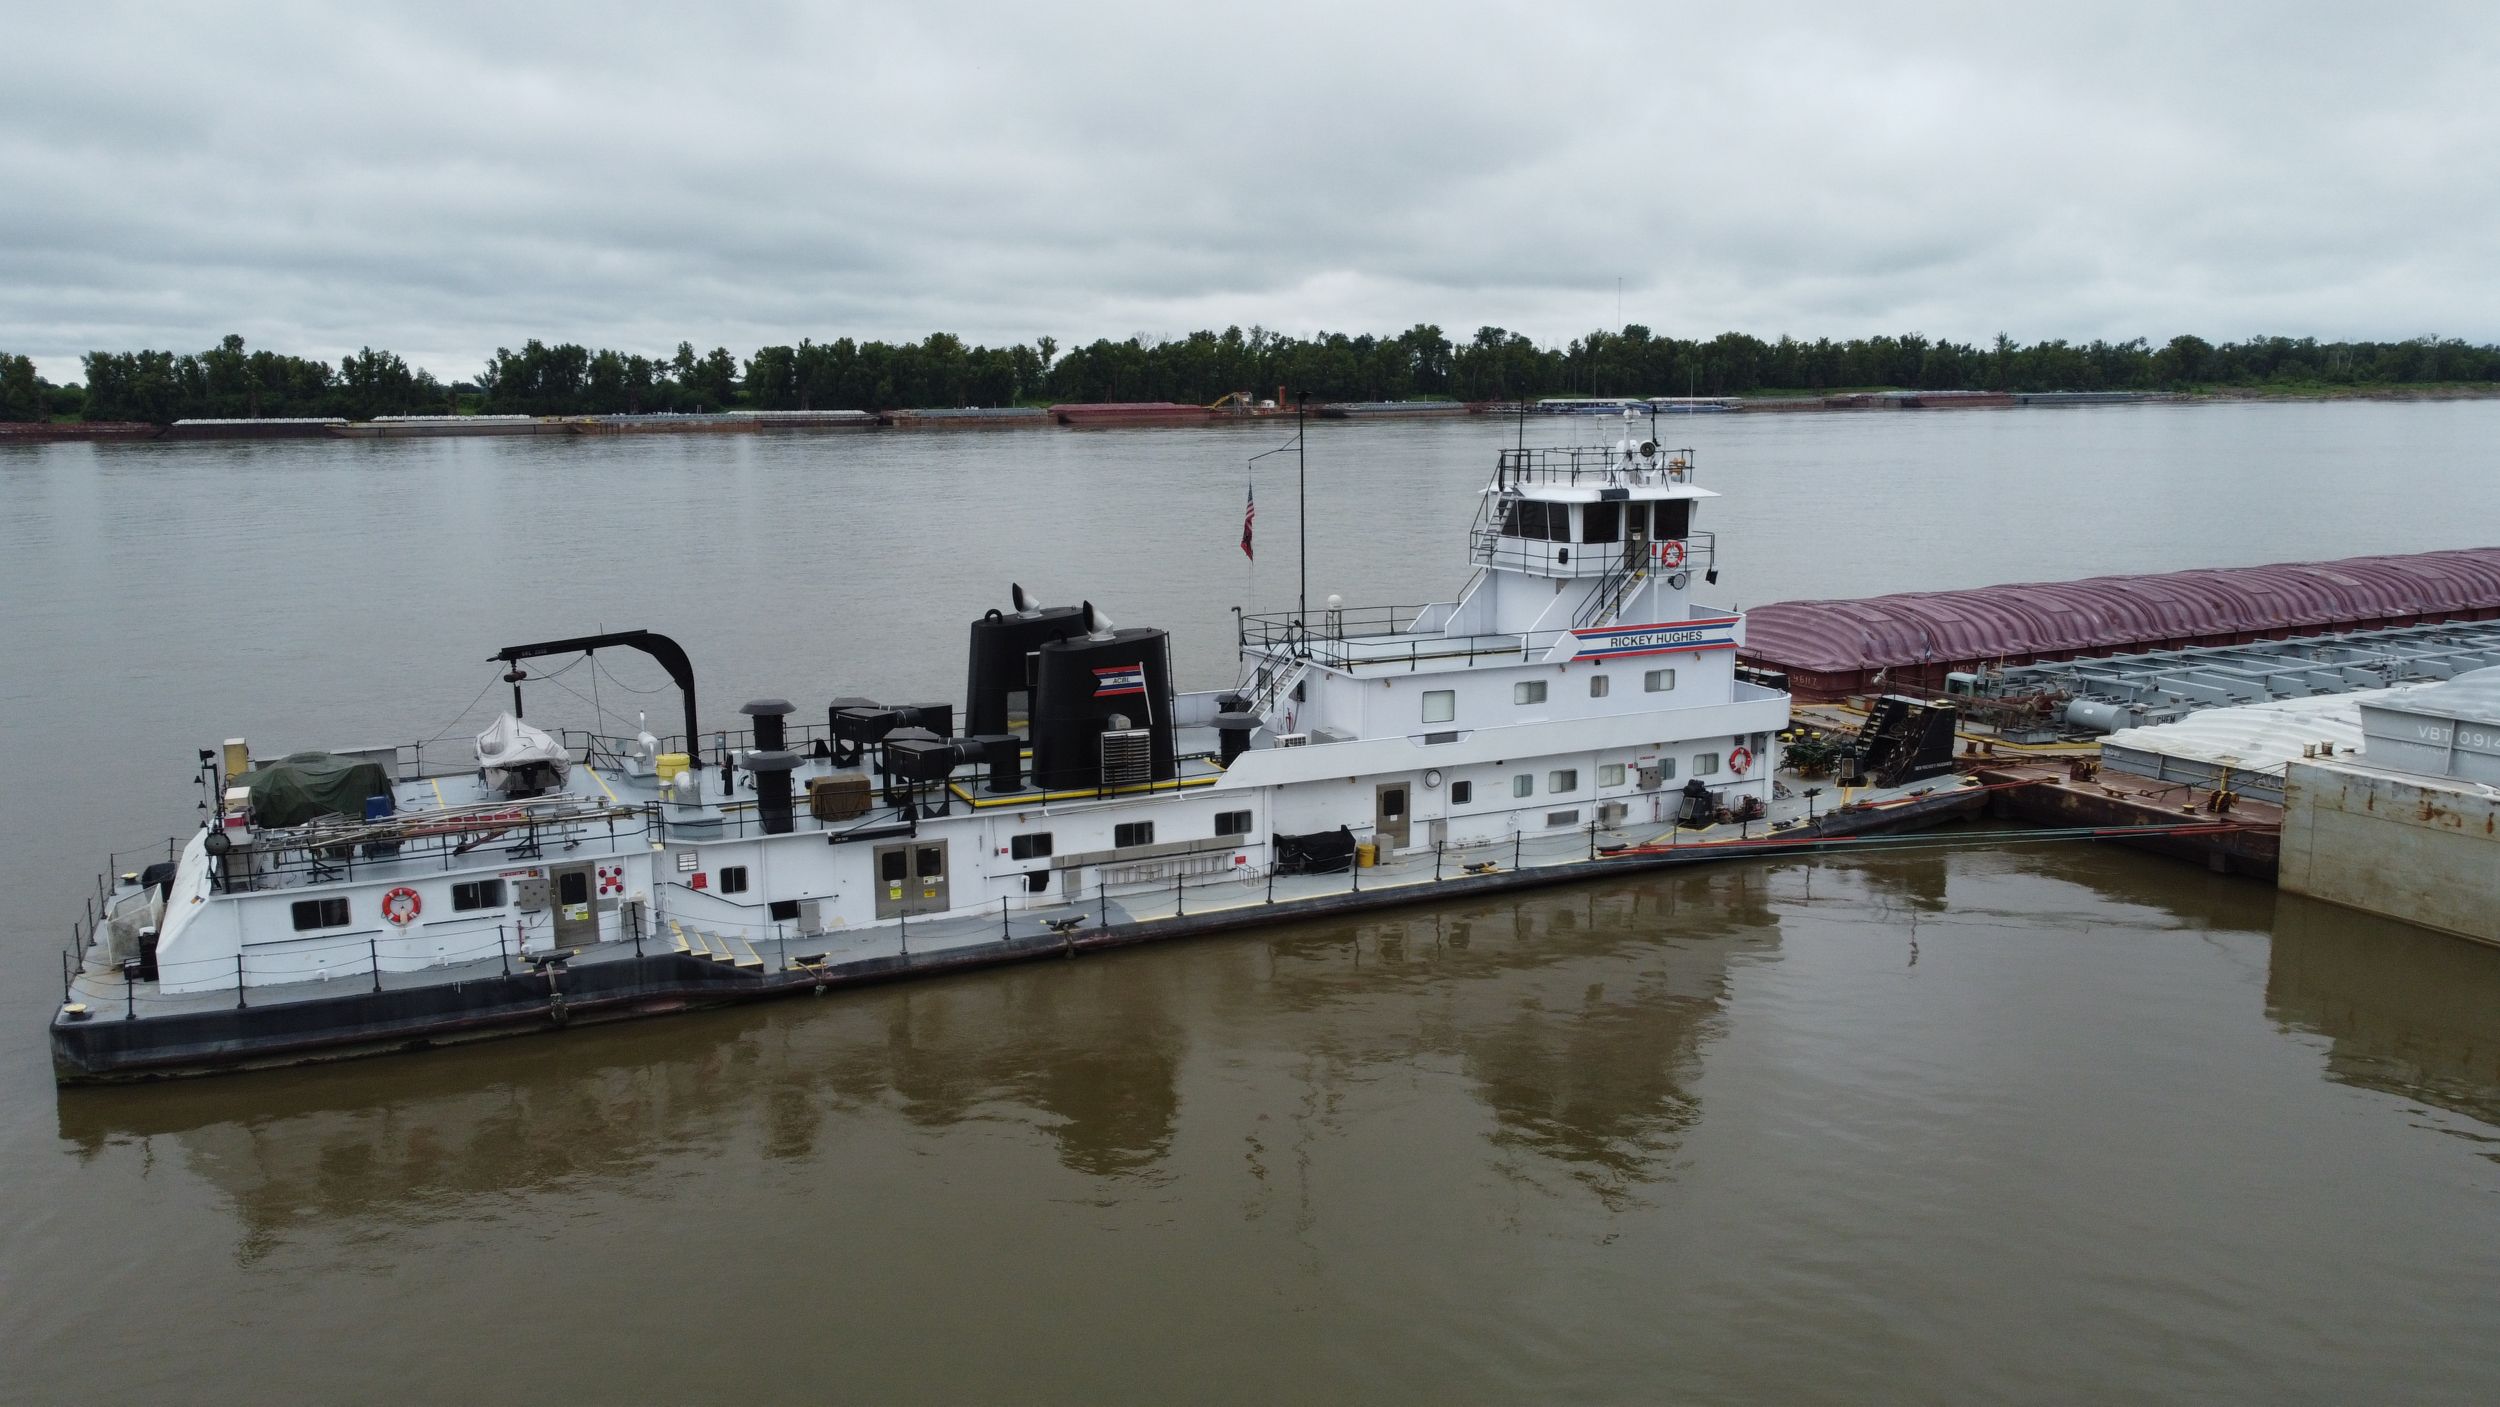 ACBL Navigates New Waters with Cat® Marine Engines & Dealer Support